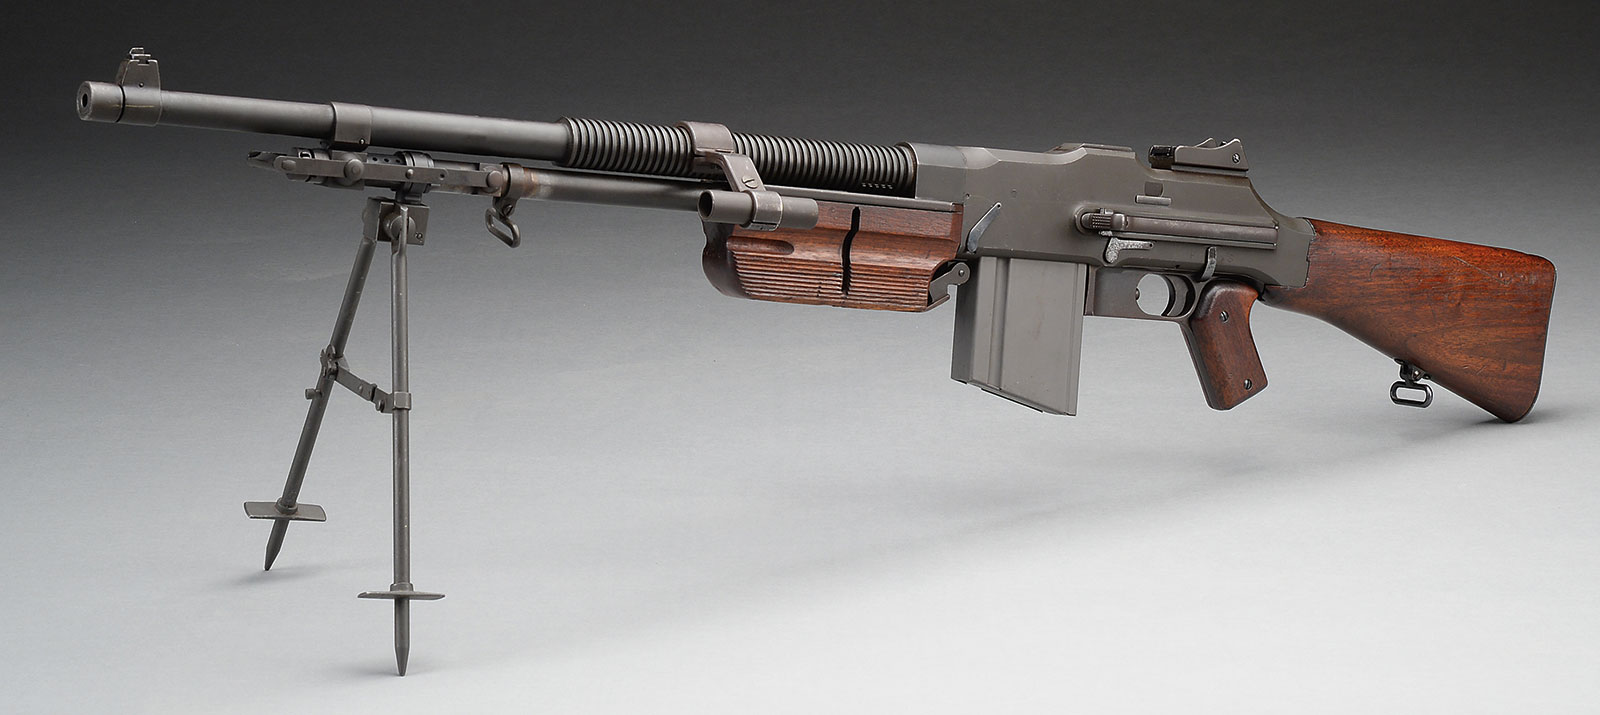 Colt R75A Browning Automatic Rifle with Detachable Barrel, estimated at $70,000-100,000.